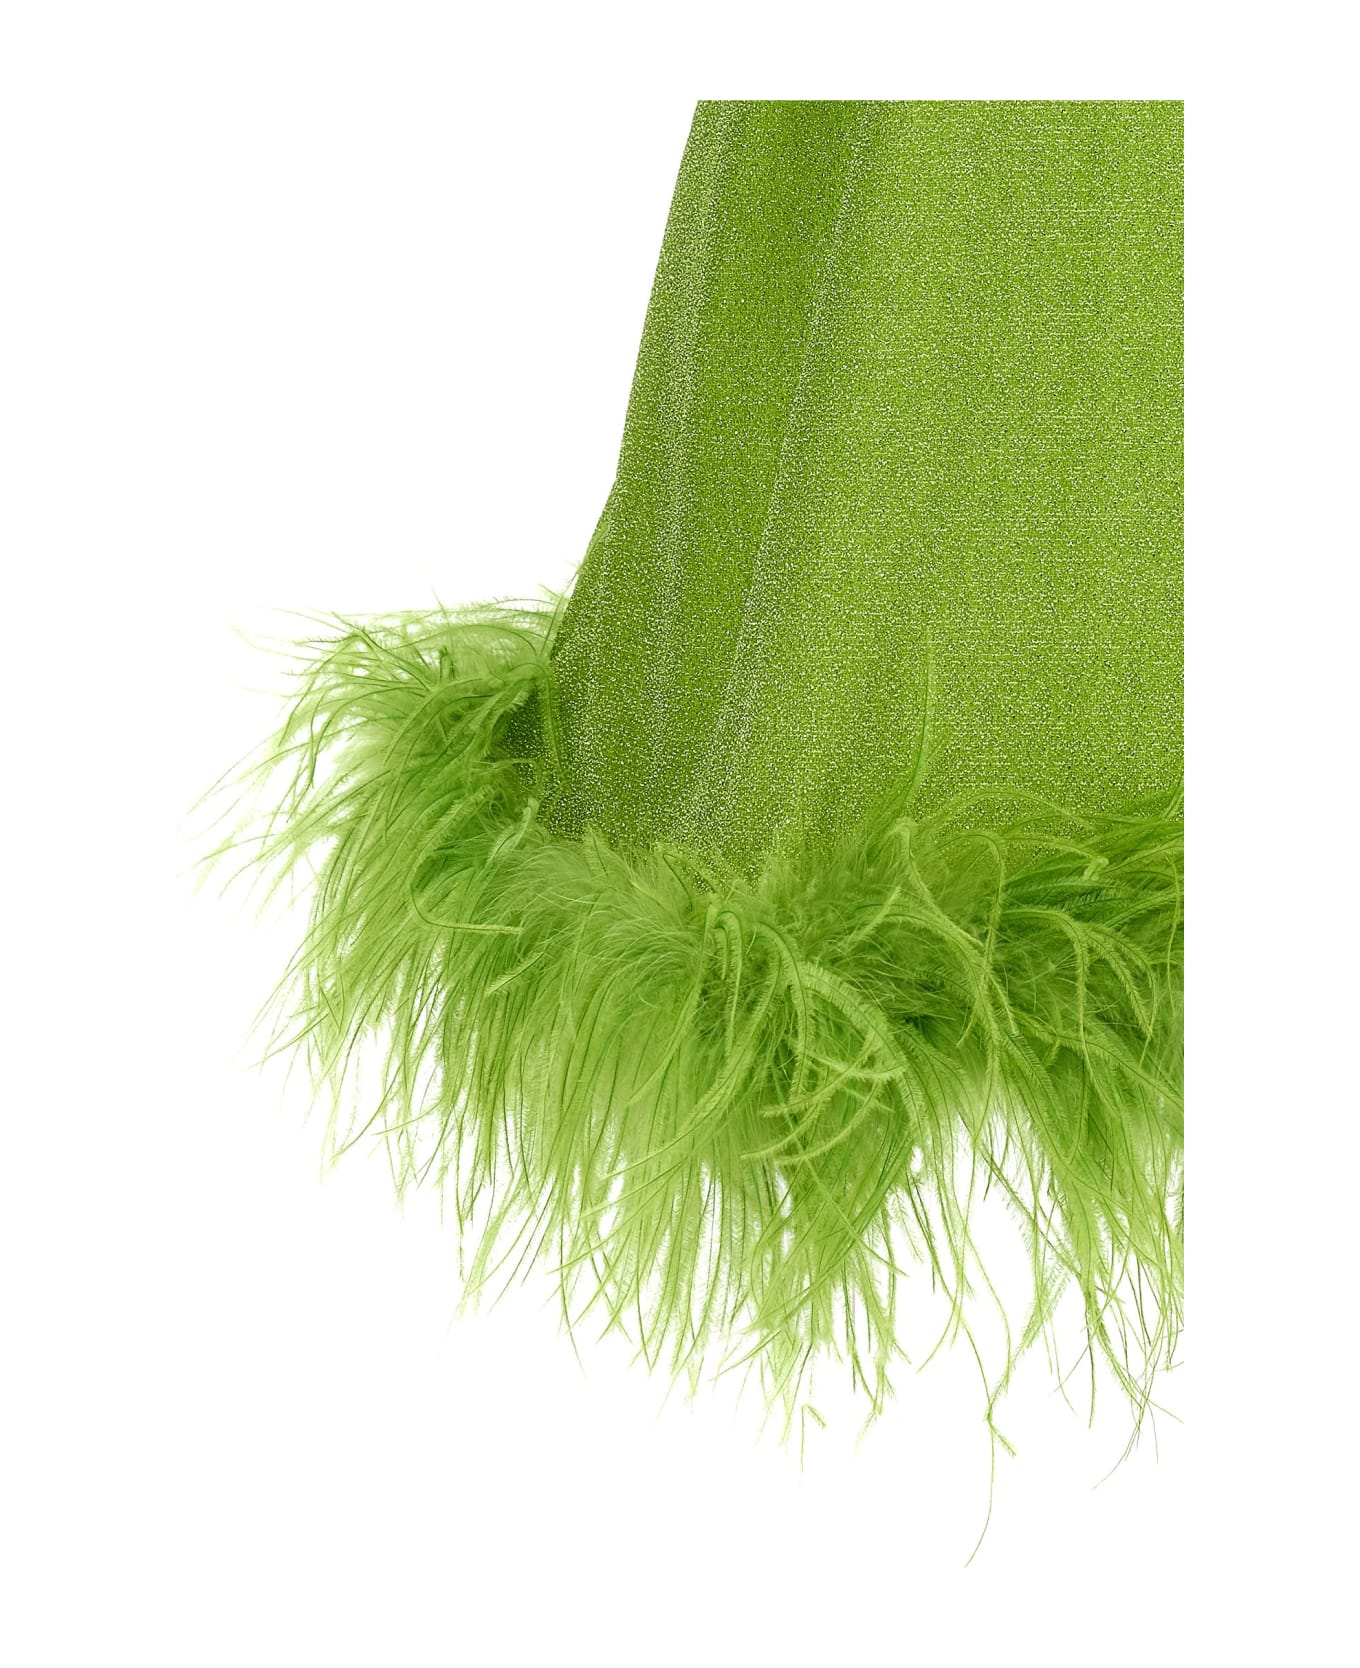 Oseree 'lumiere Plumage' Dress - Lime